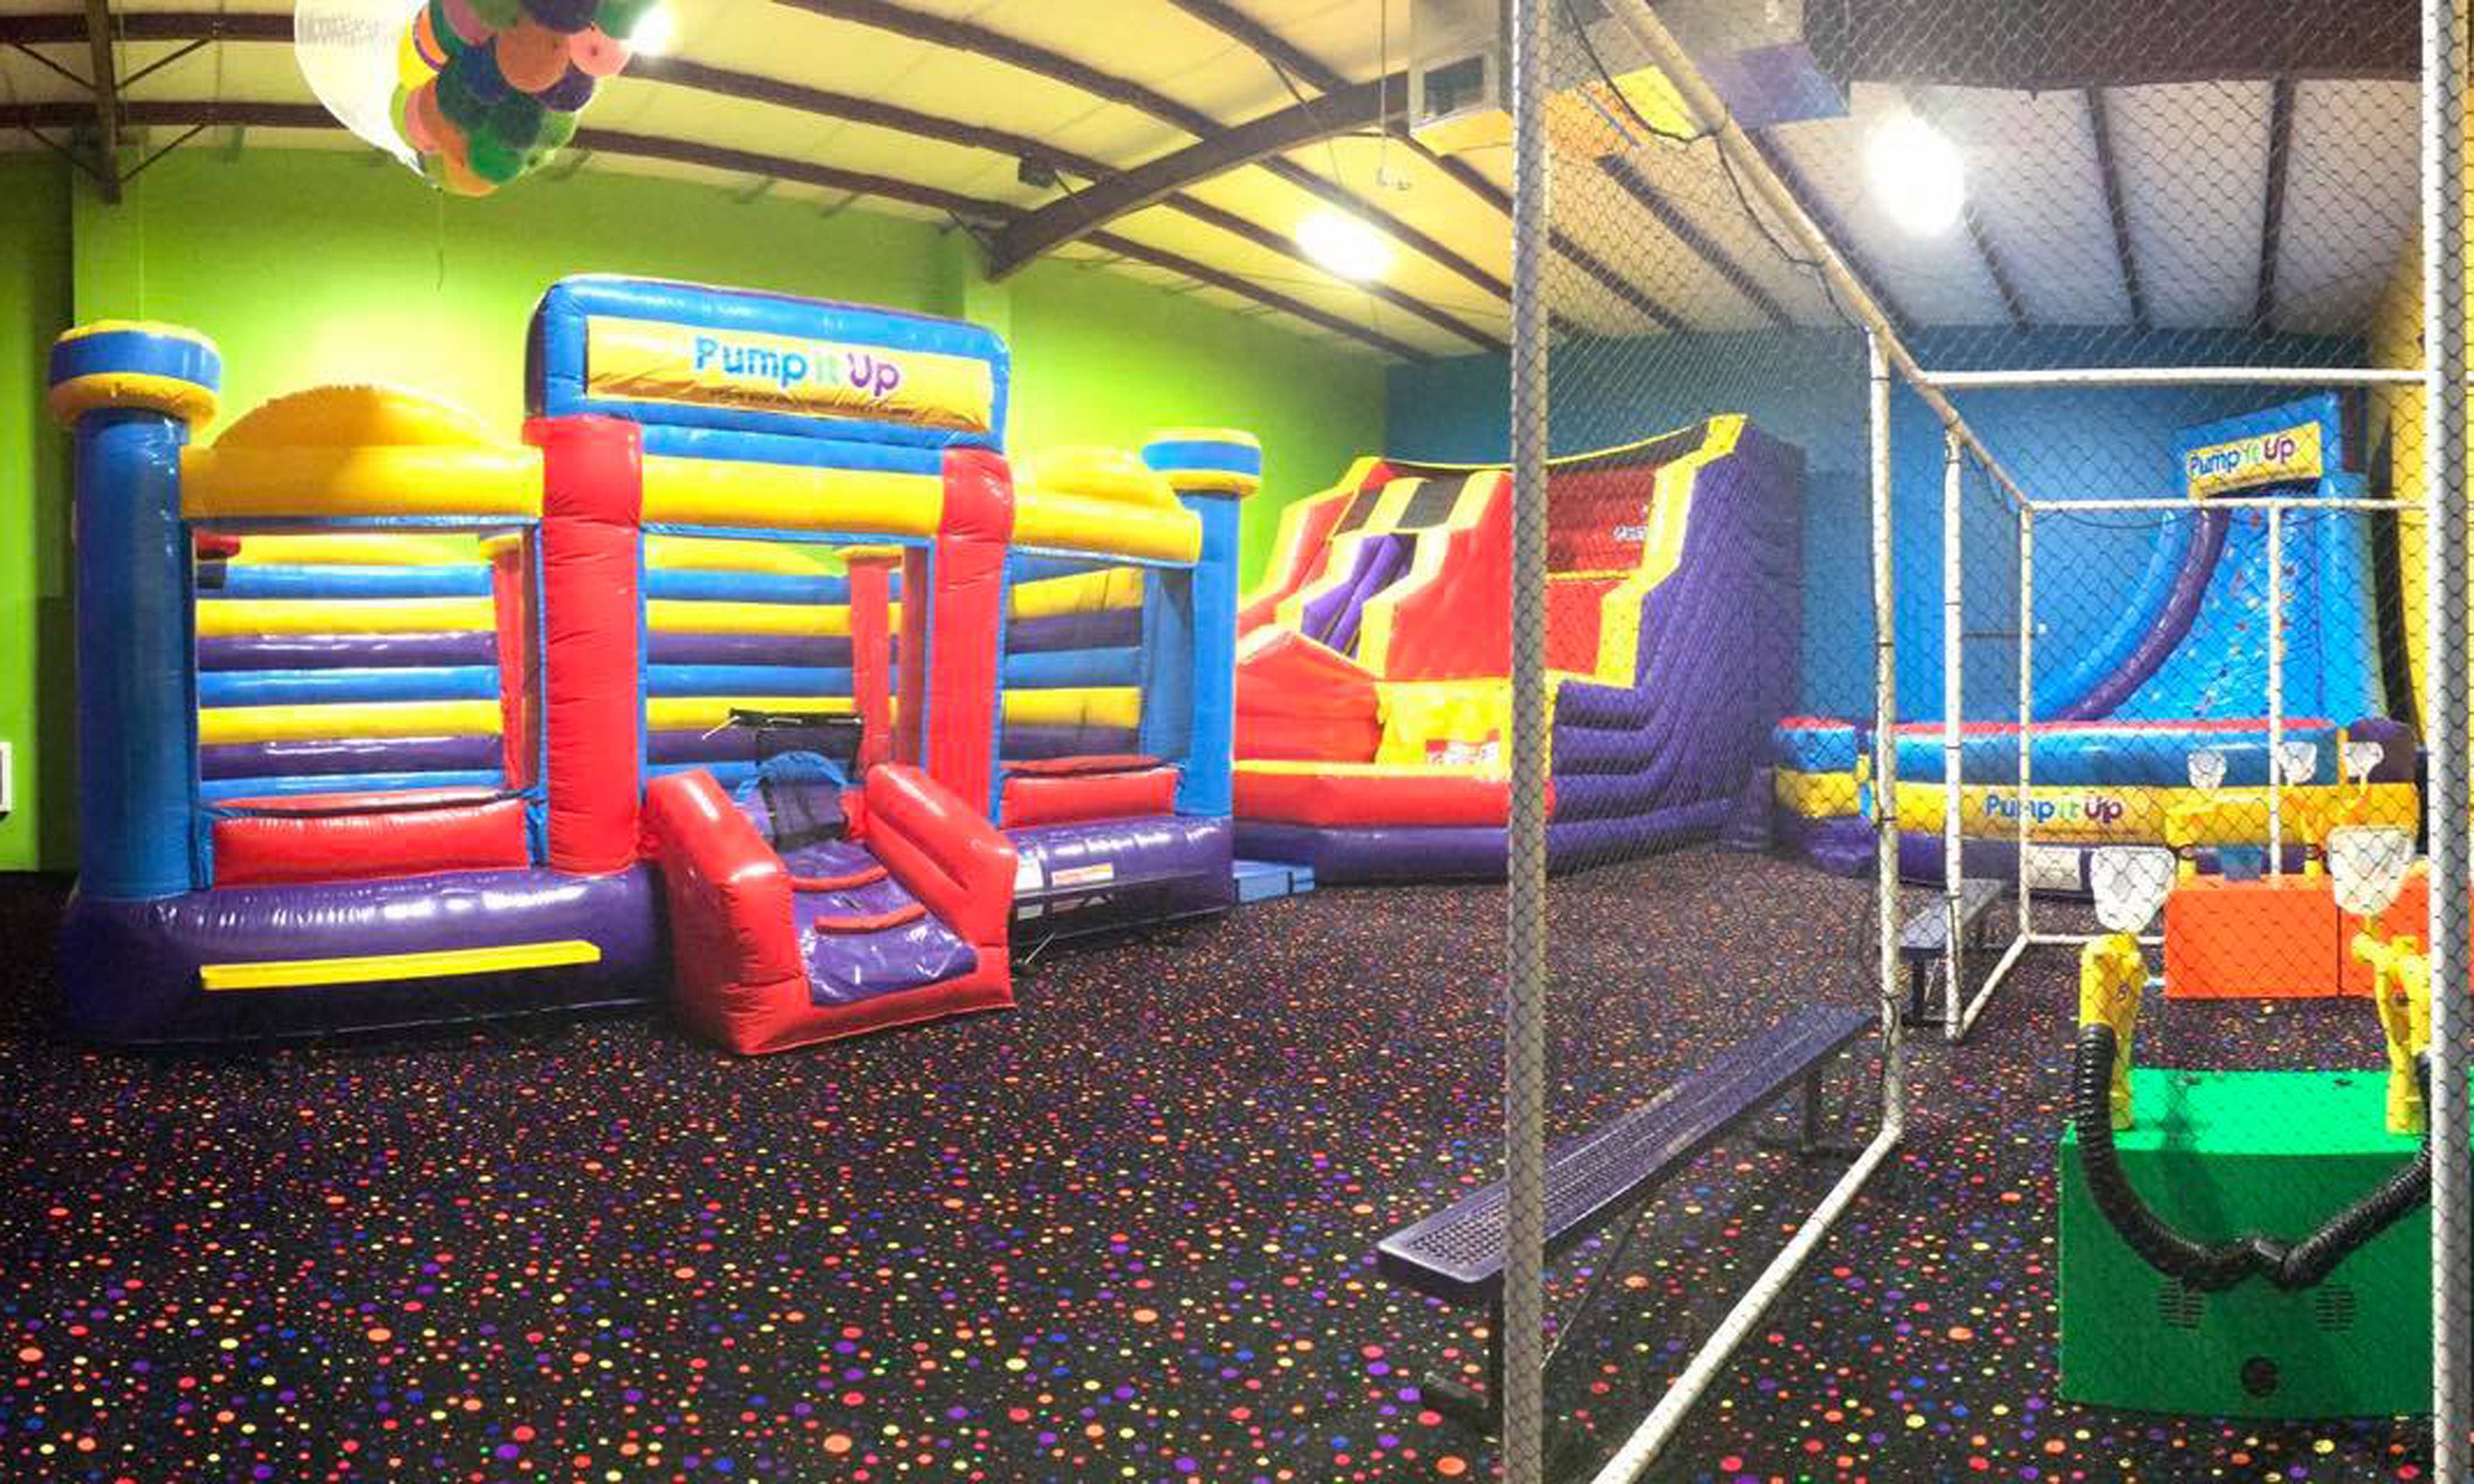 Pump It Up of Pelham moves to new location - Shelby County Reporter